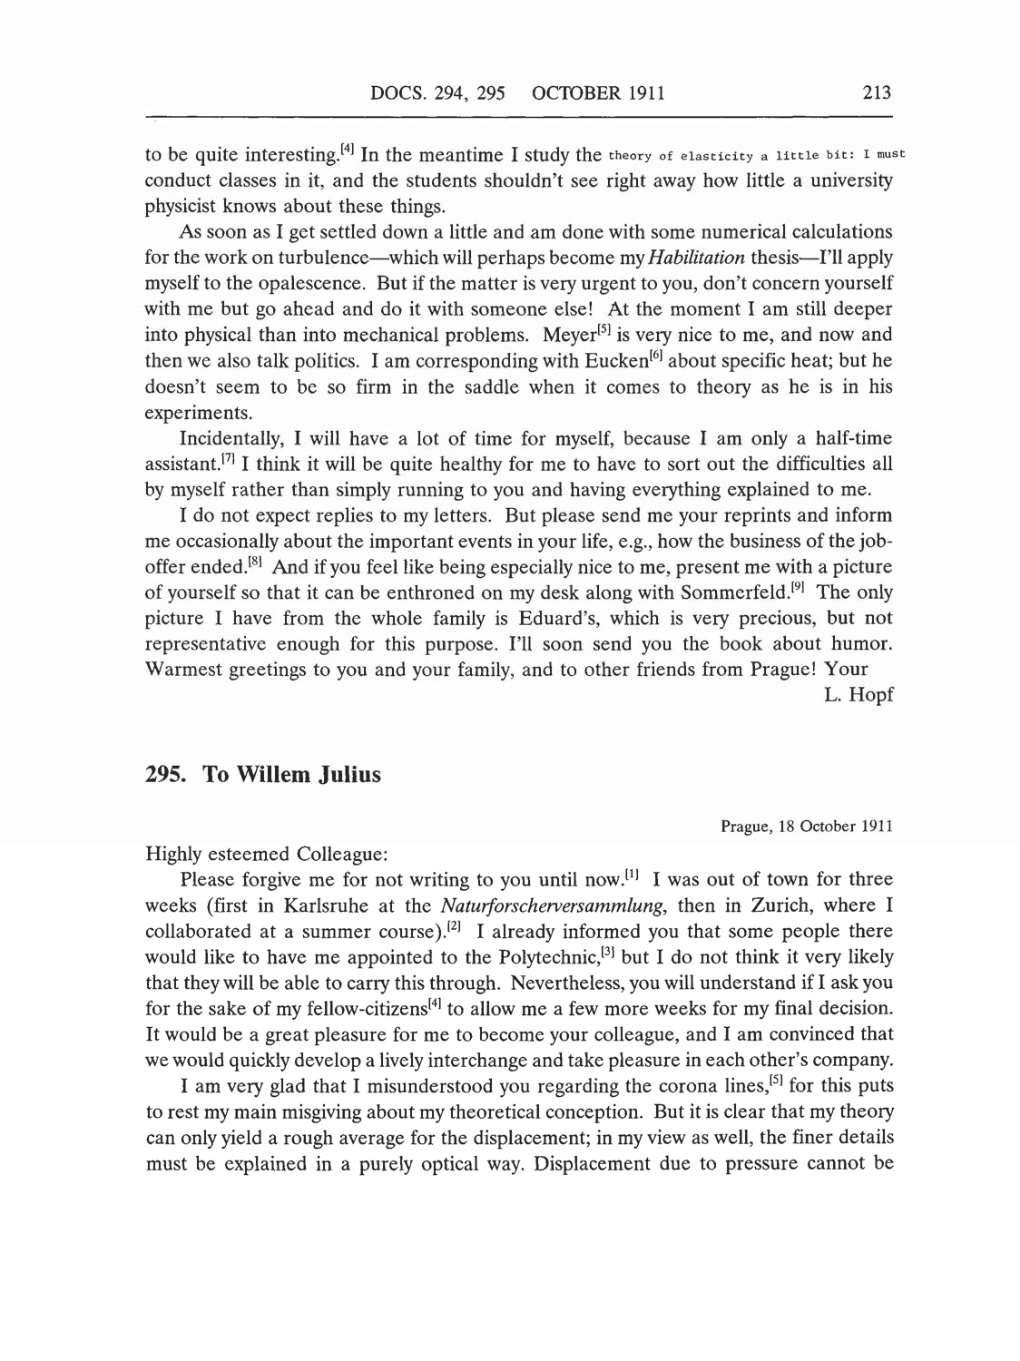 Volume 5: The Swiss Years: Correspondence, 1902-1914 (English translation supplement) page 213